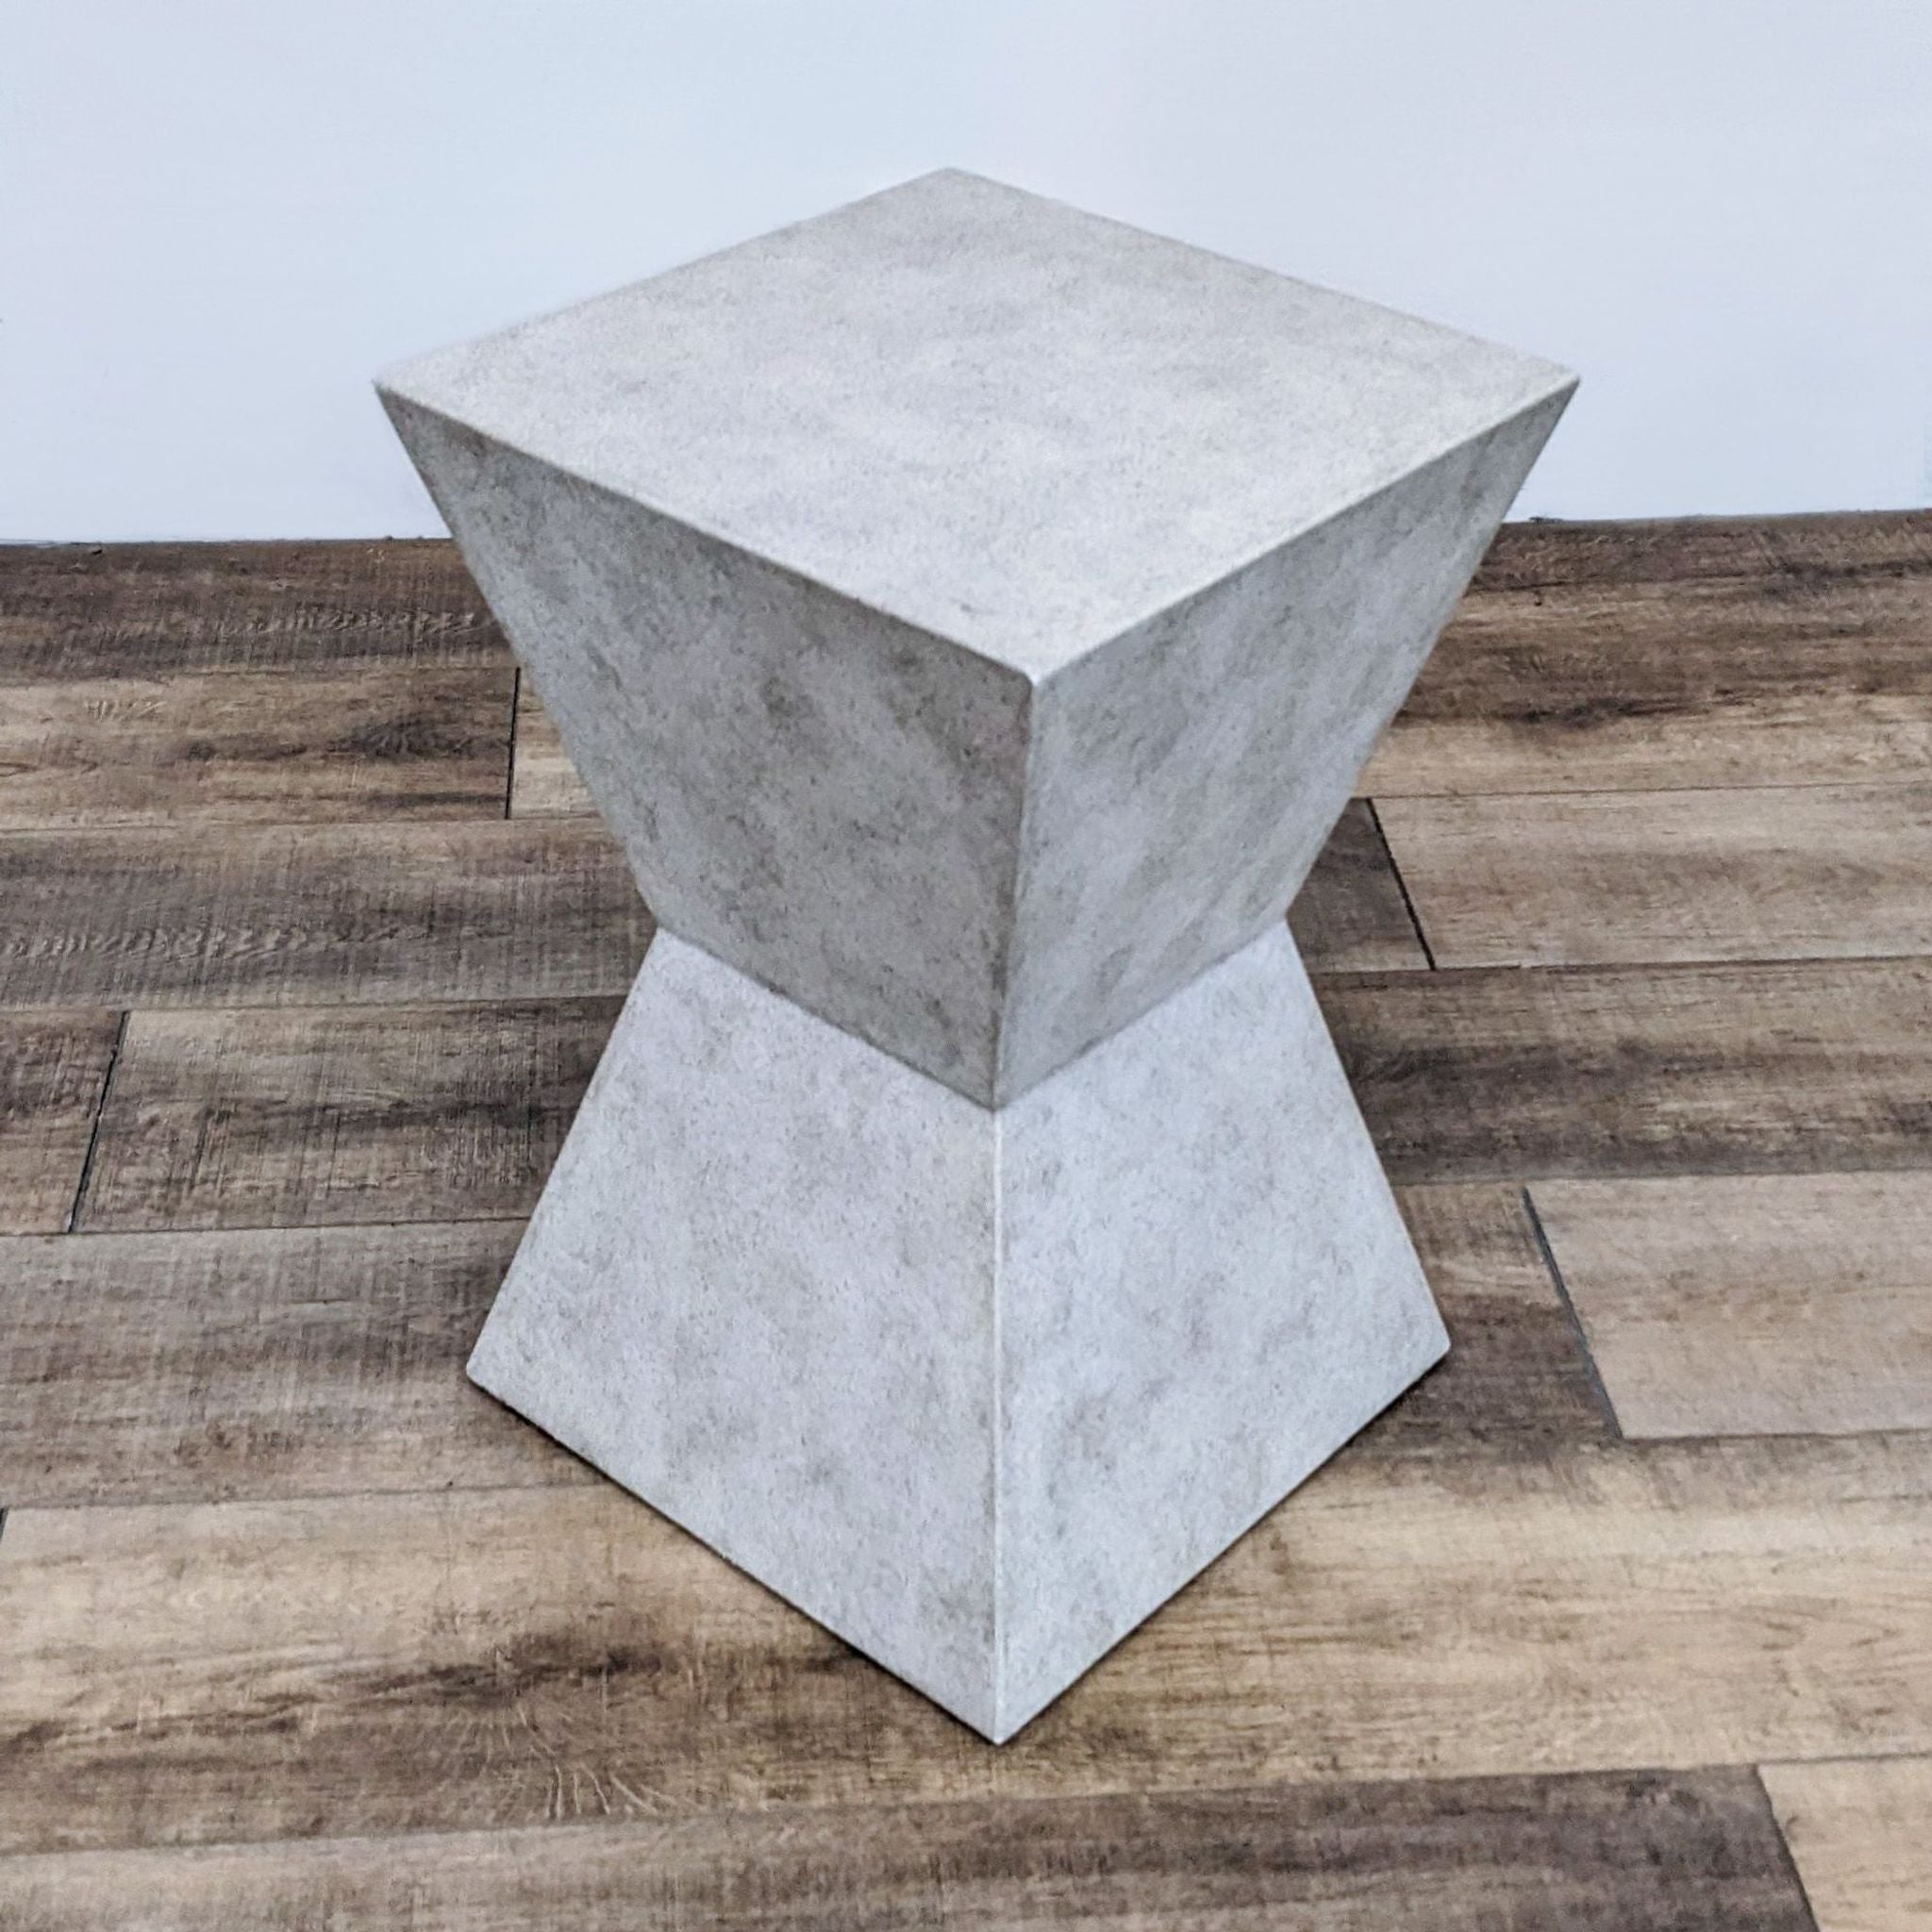 Reperch brand faux concrete end table with angular design on a wooden floor.